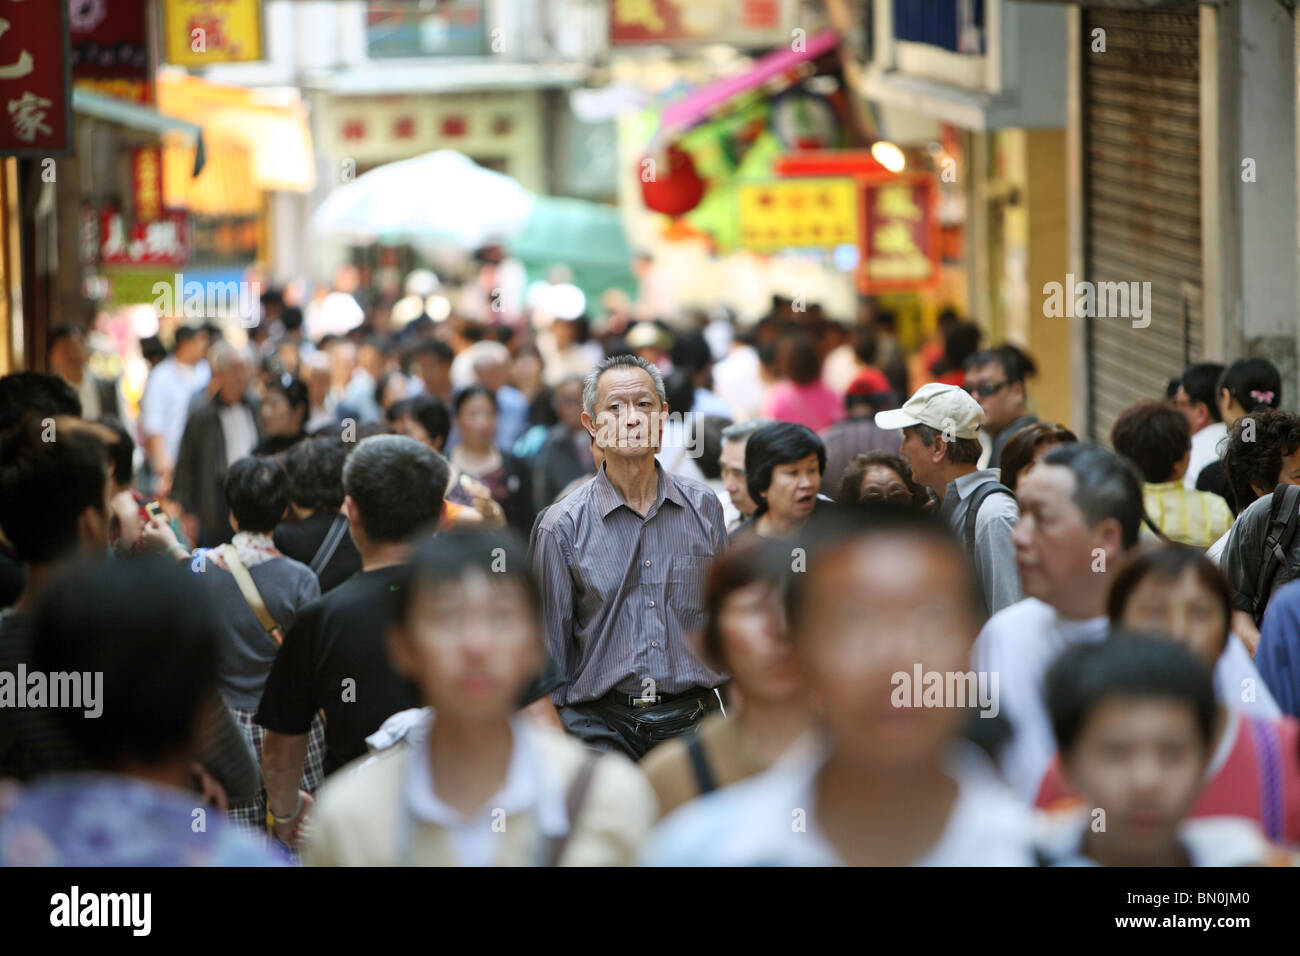 A busy shopping street, Macao, China Stock Photo